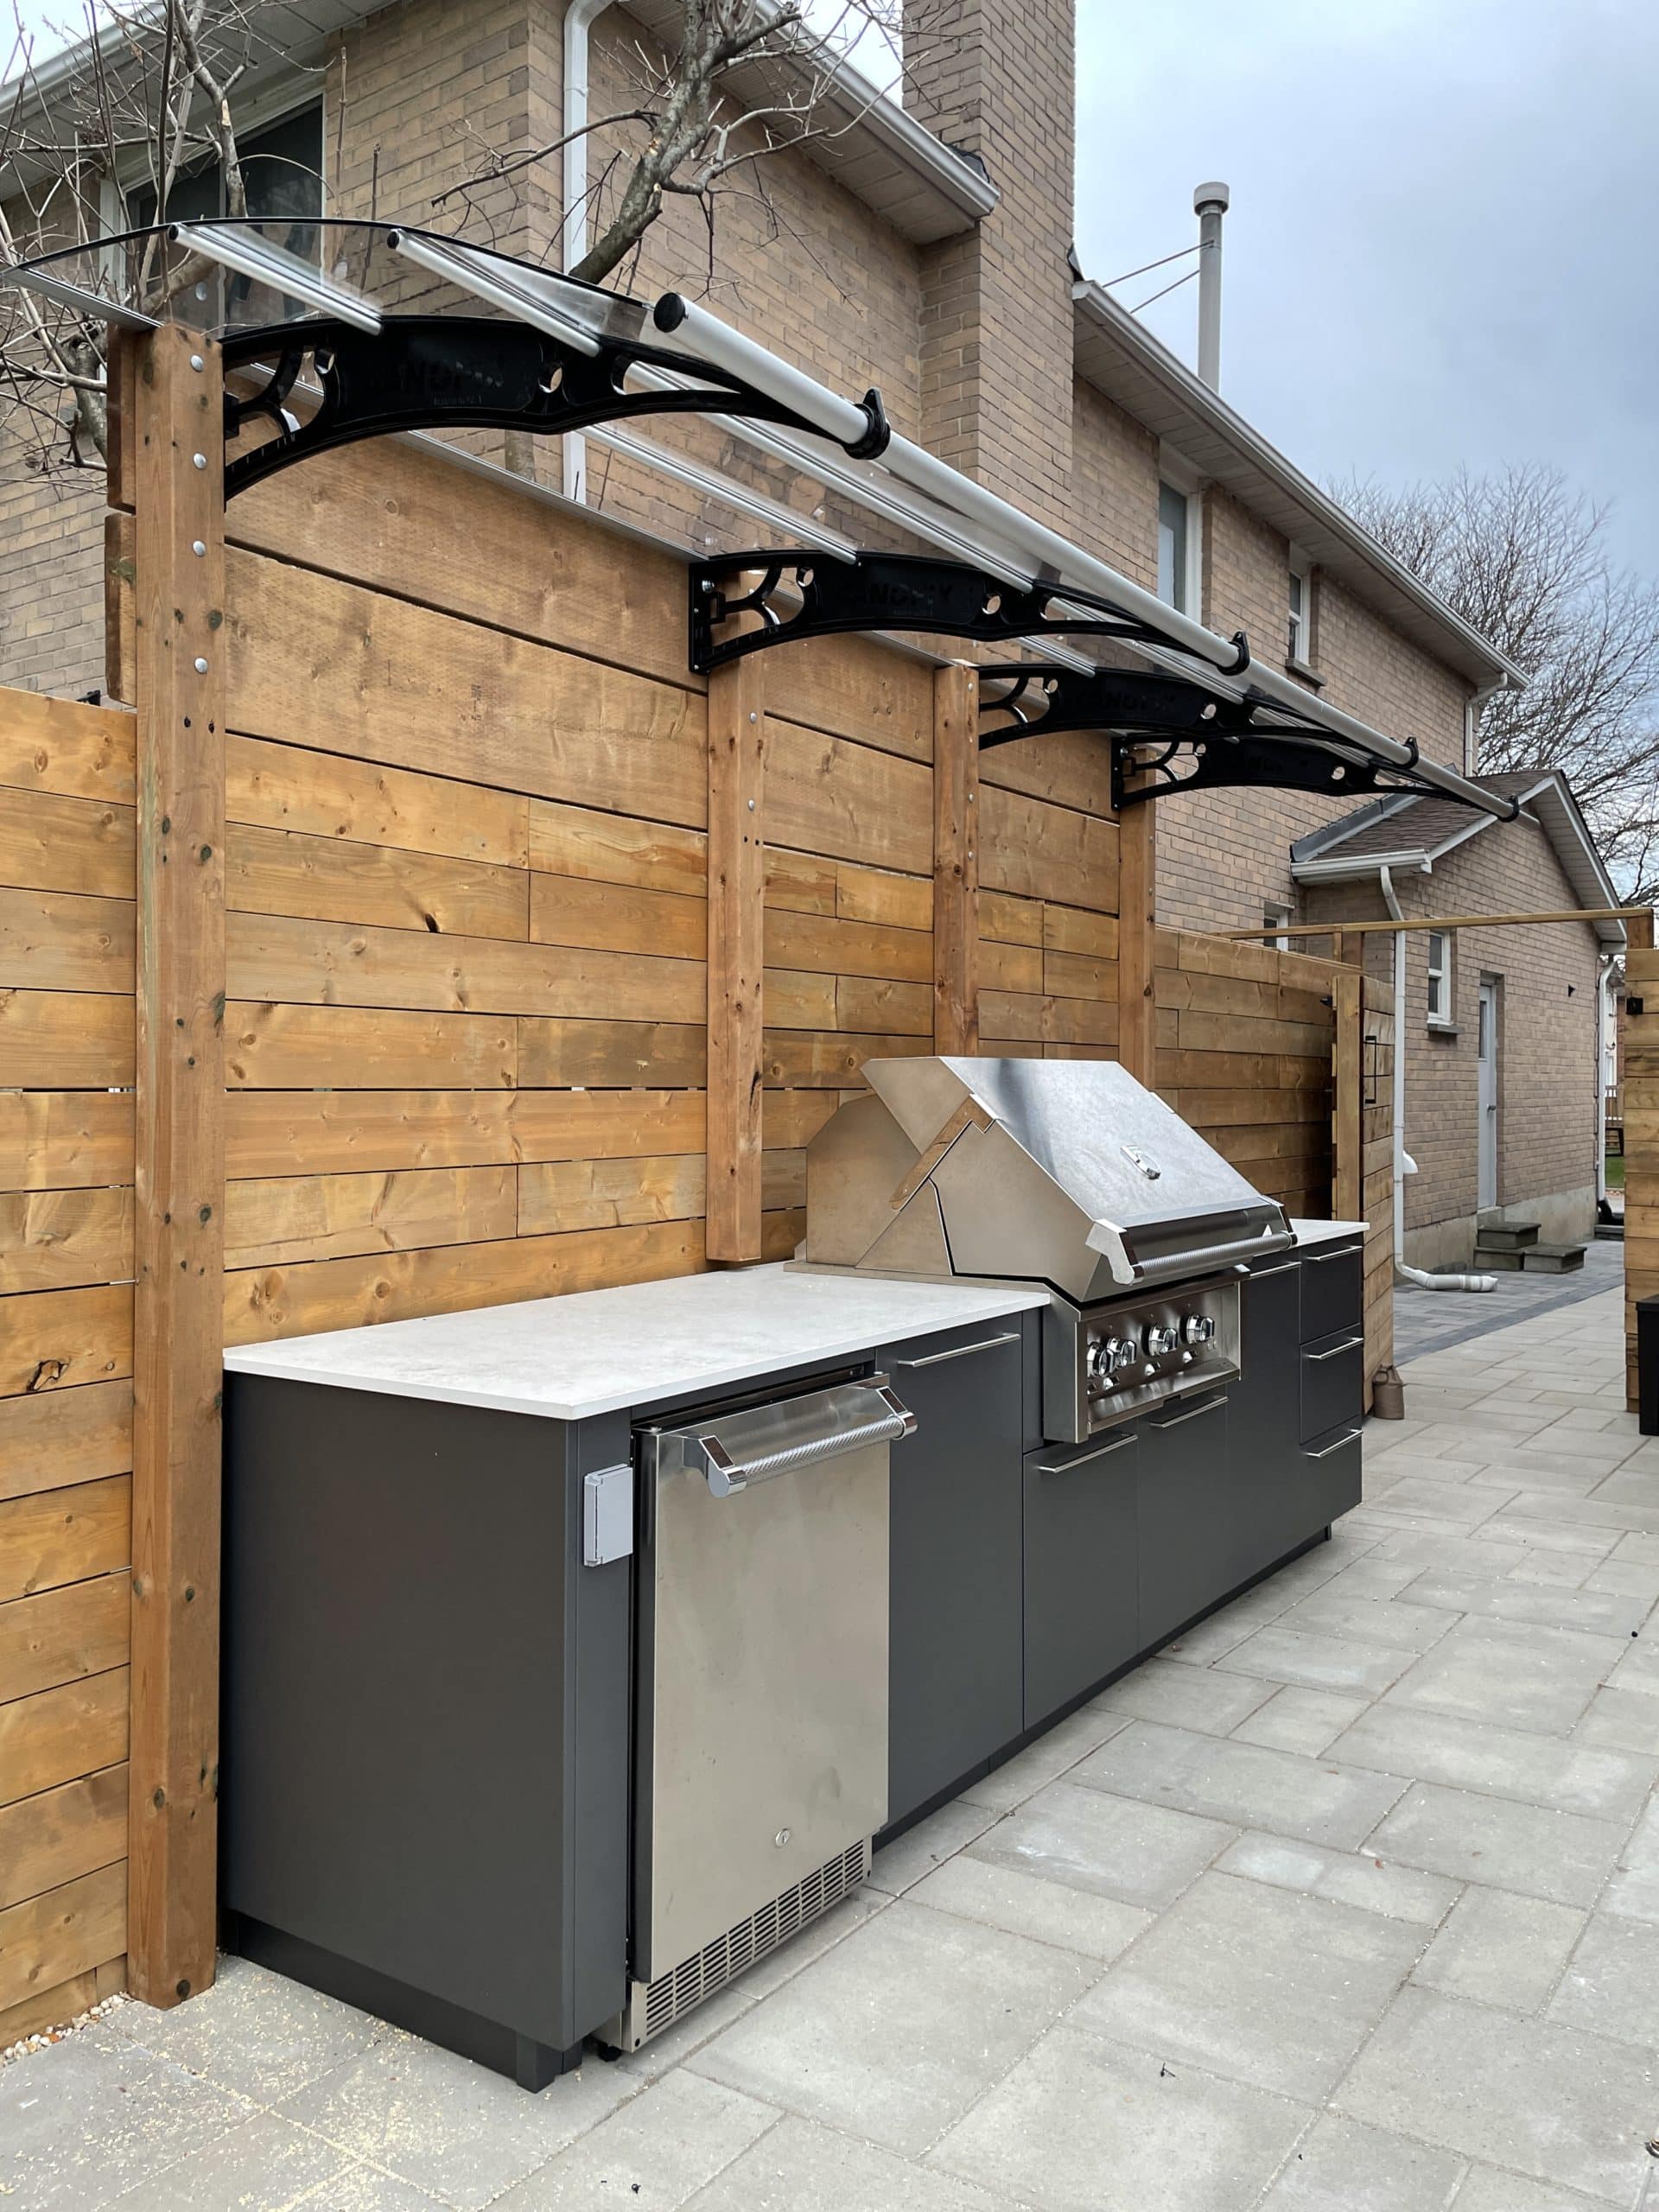 Barbecue Awning Canopy